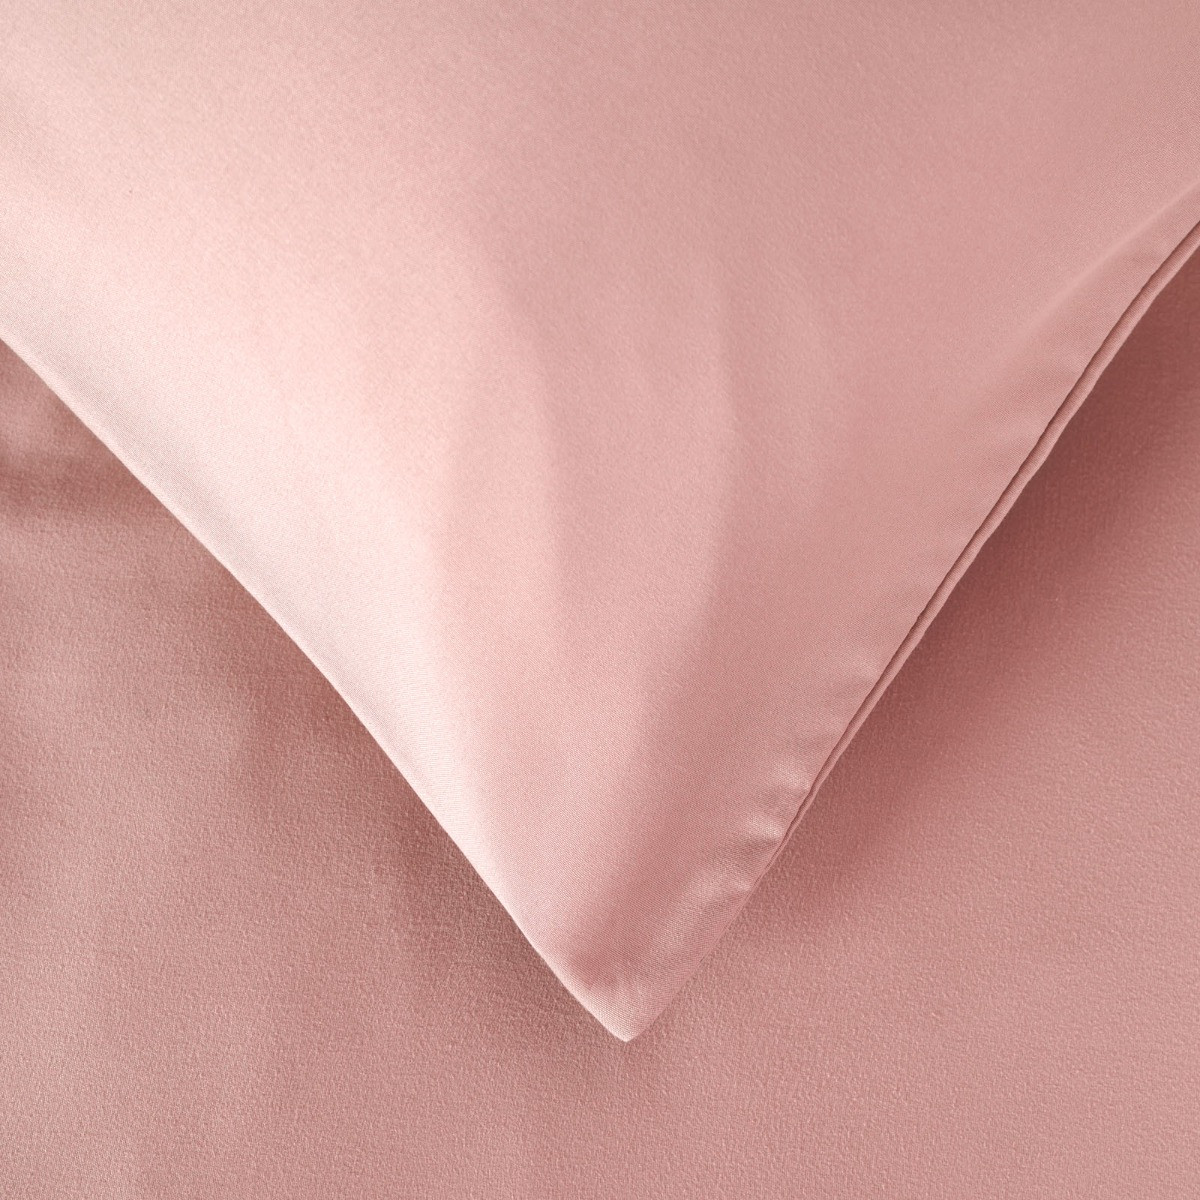 Brentfords 2 Pack Plain Dyed Housewife Pillowcases - Dusky Pink>